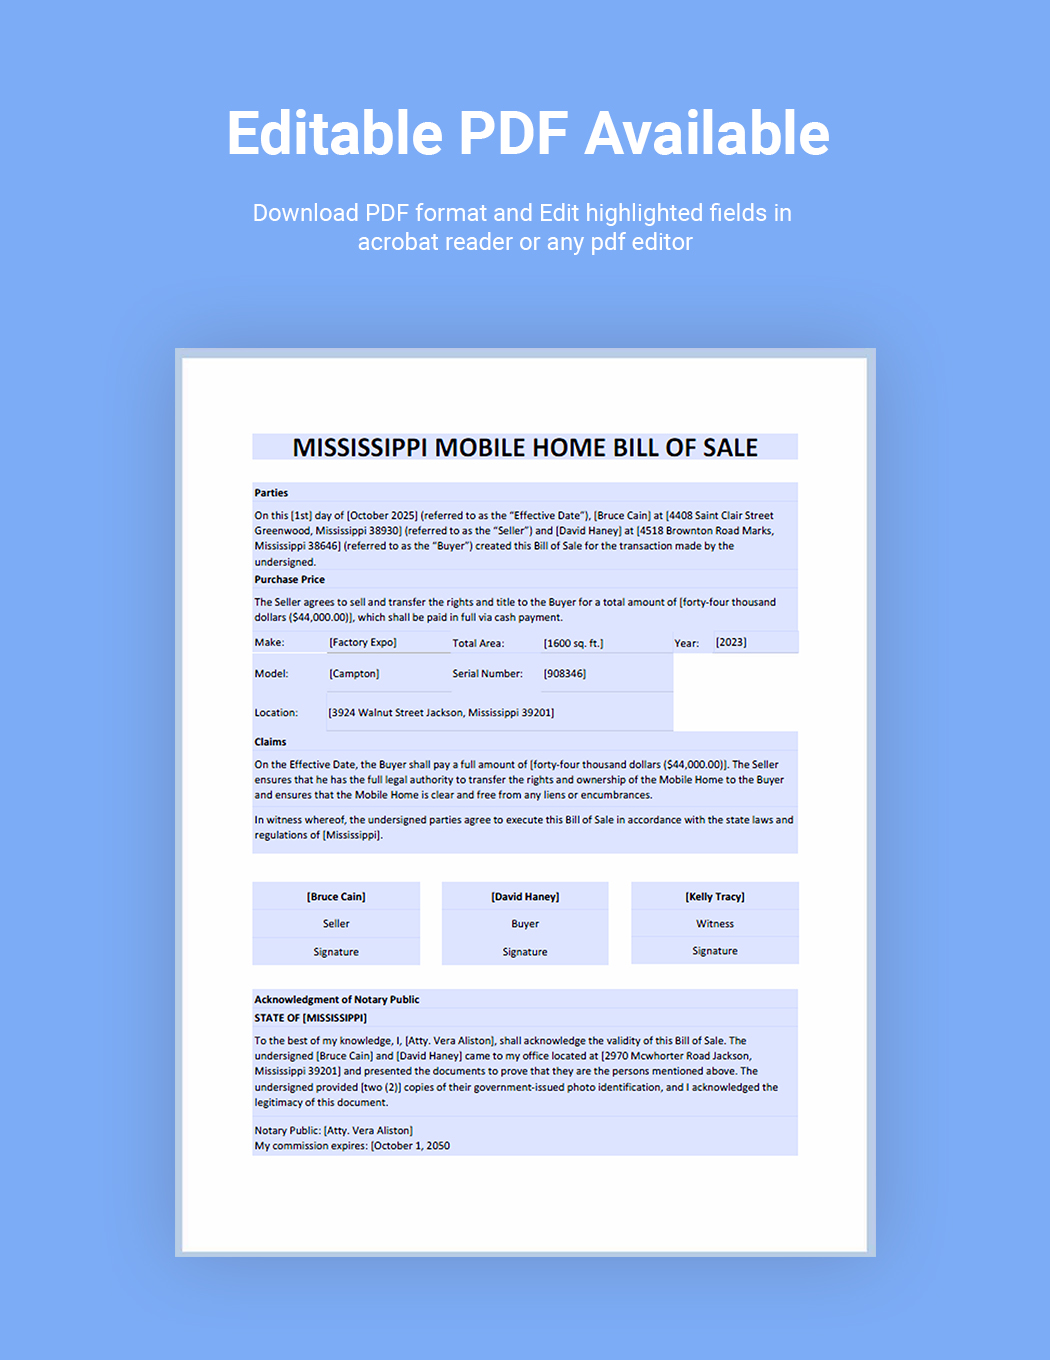 Mississippi Mobile Home Bill of Sale Template